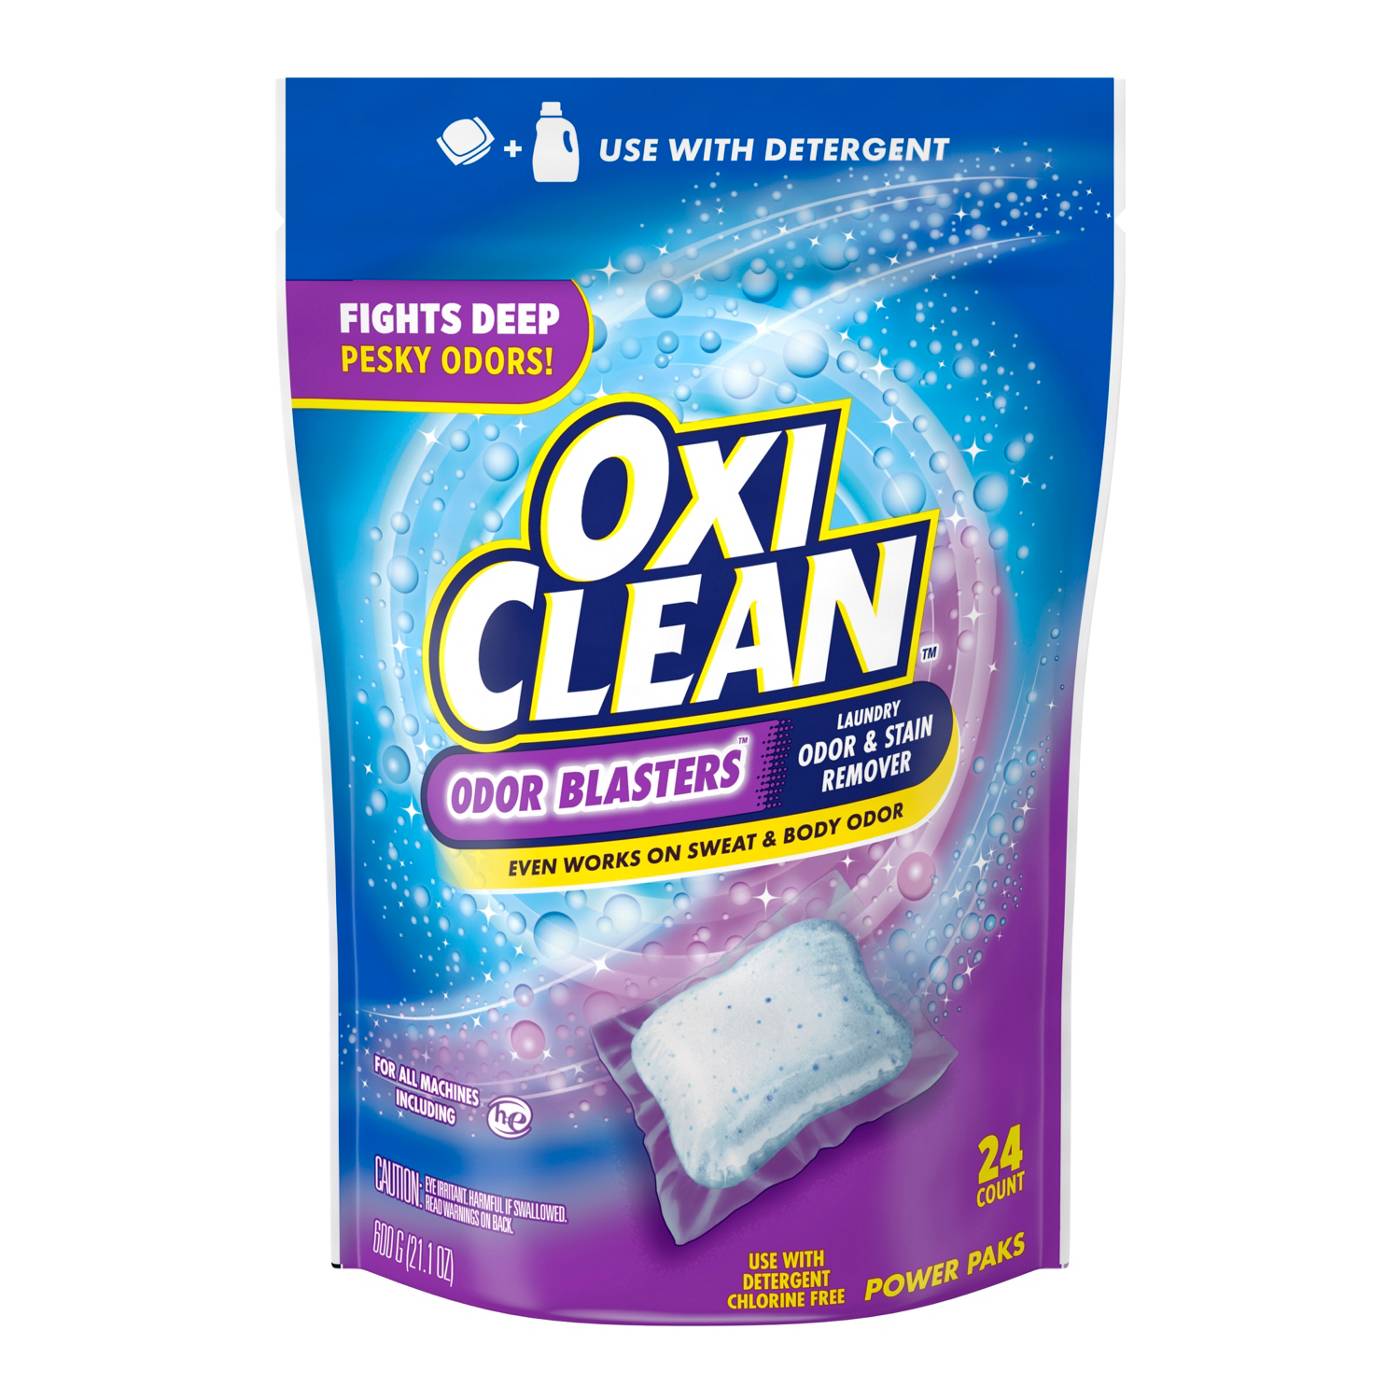 OxiClean Odor Blasters Laundry Stain Remover Power Paks, 24 Loads; image 1 of 2